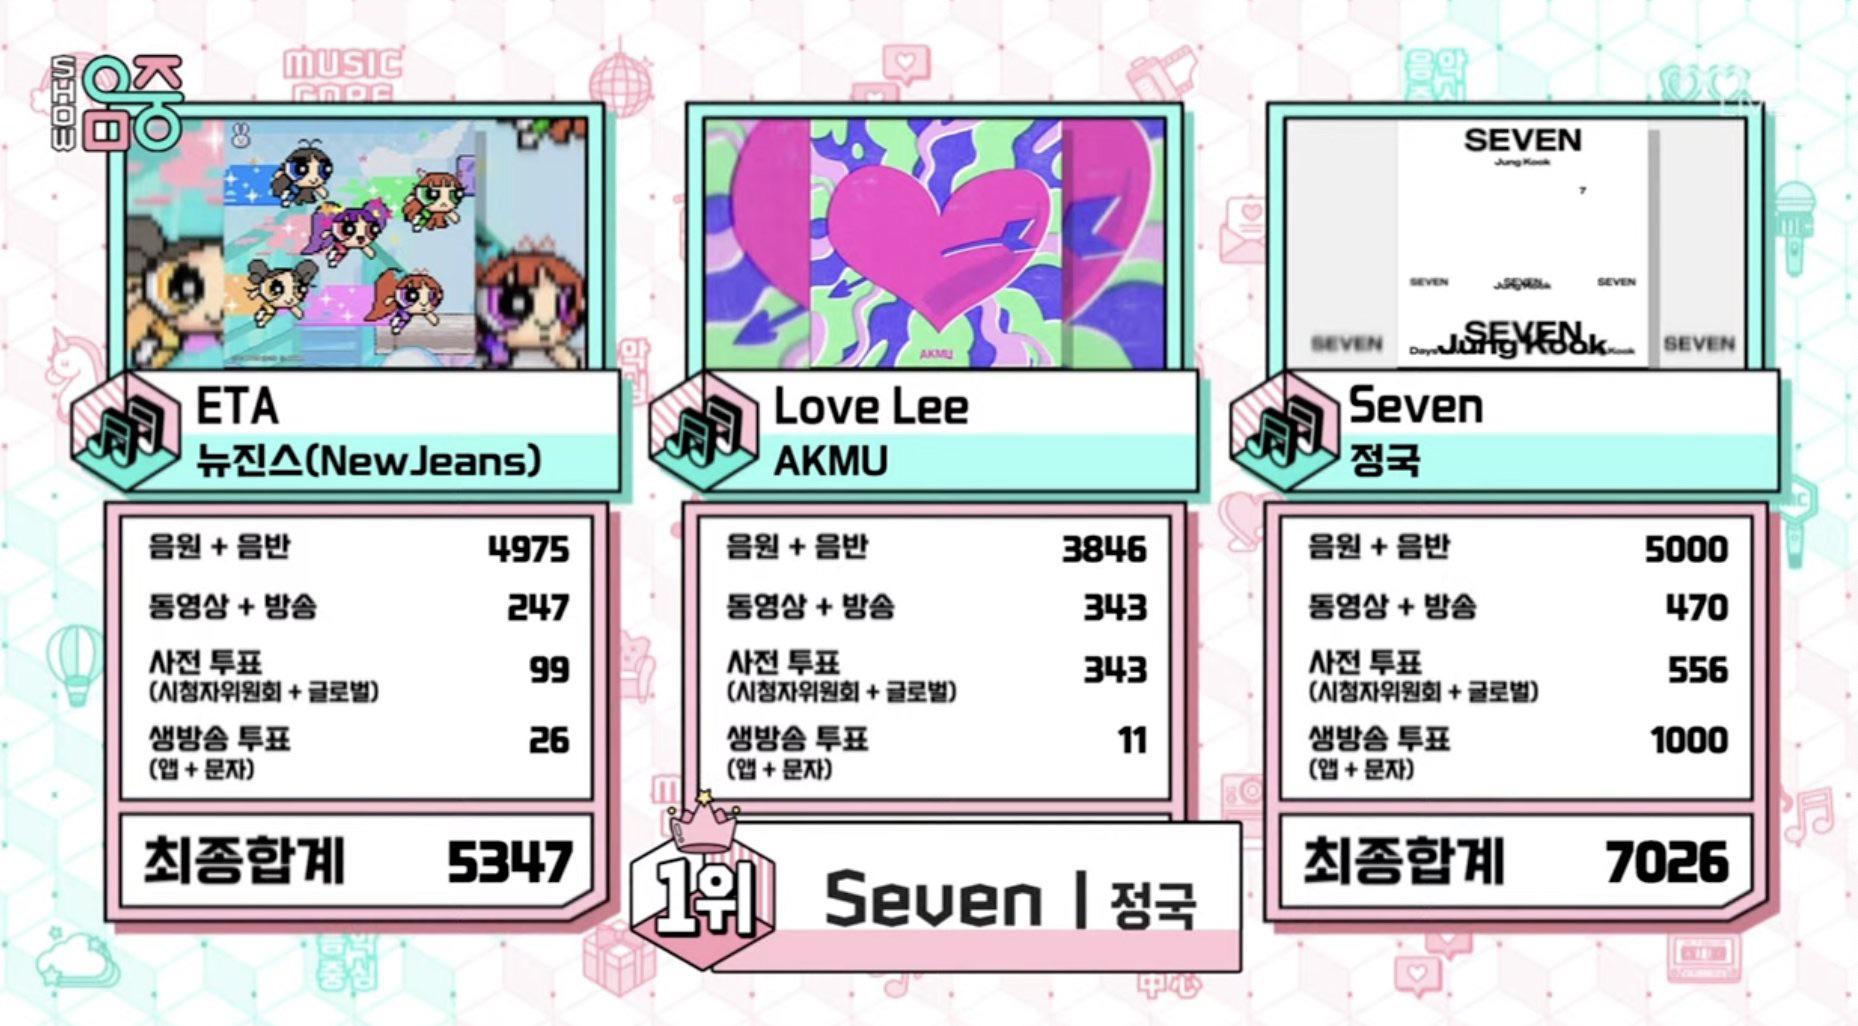 Jungkook has taken his 12th win for “Seven (feat. Latto)” on this week’s Music Core - 090923